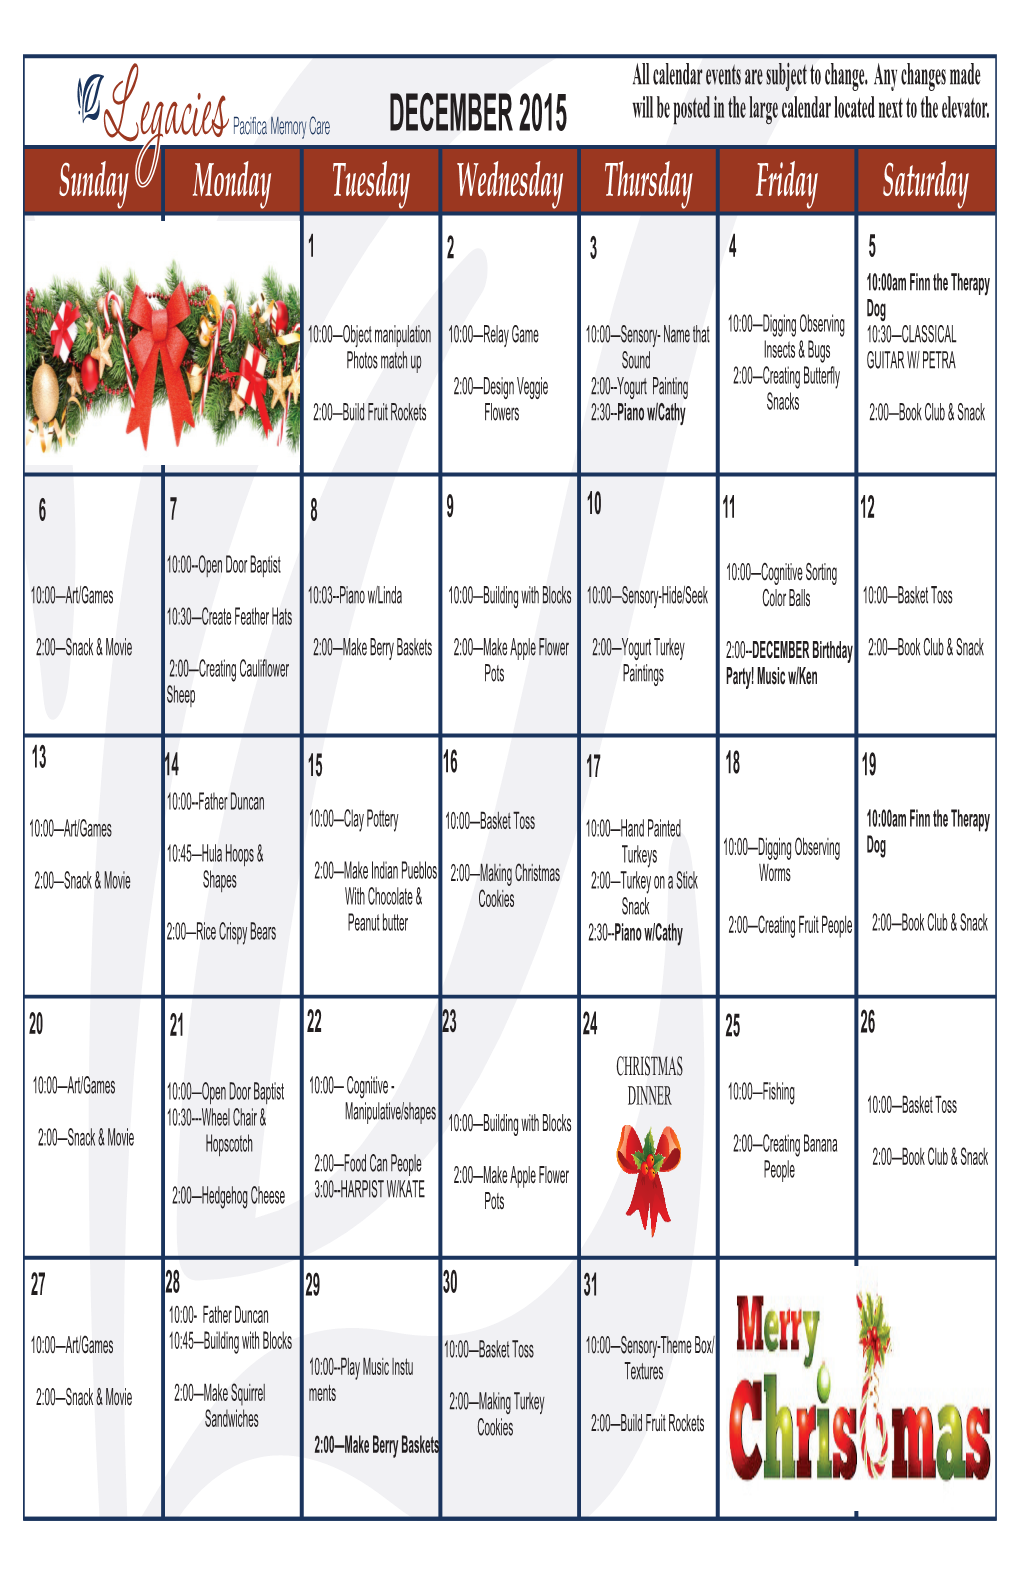 DECEMBER 2015 Will Be Posted in the Large Calendar Located Next to the Elevator